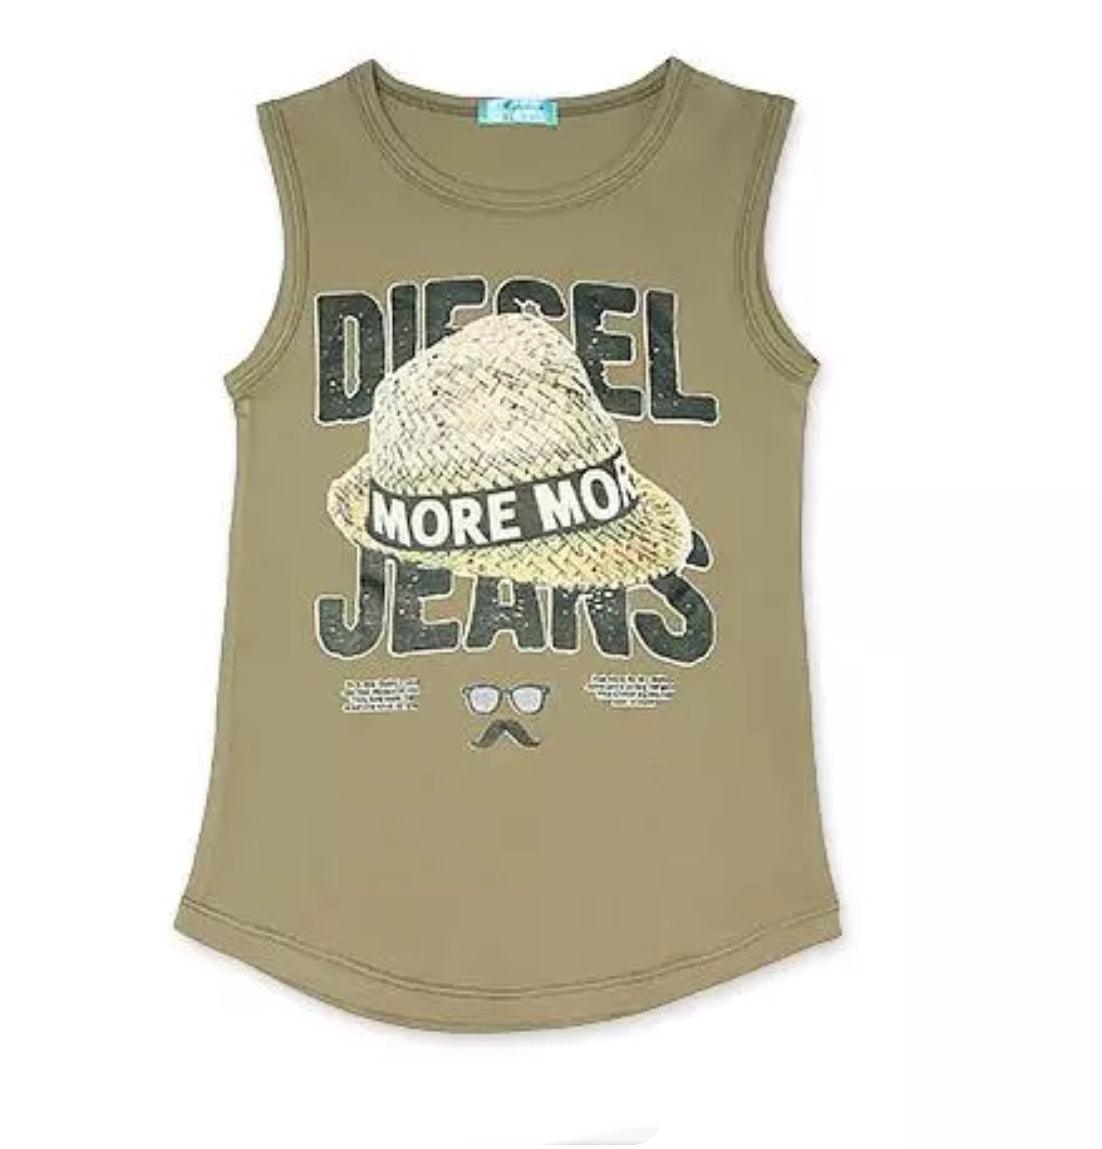 Boys Vest Diesel Jeans Sleeveless T Shirt Printed Clothes Bump baby and beyond